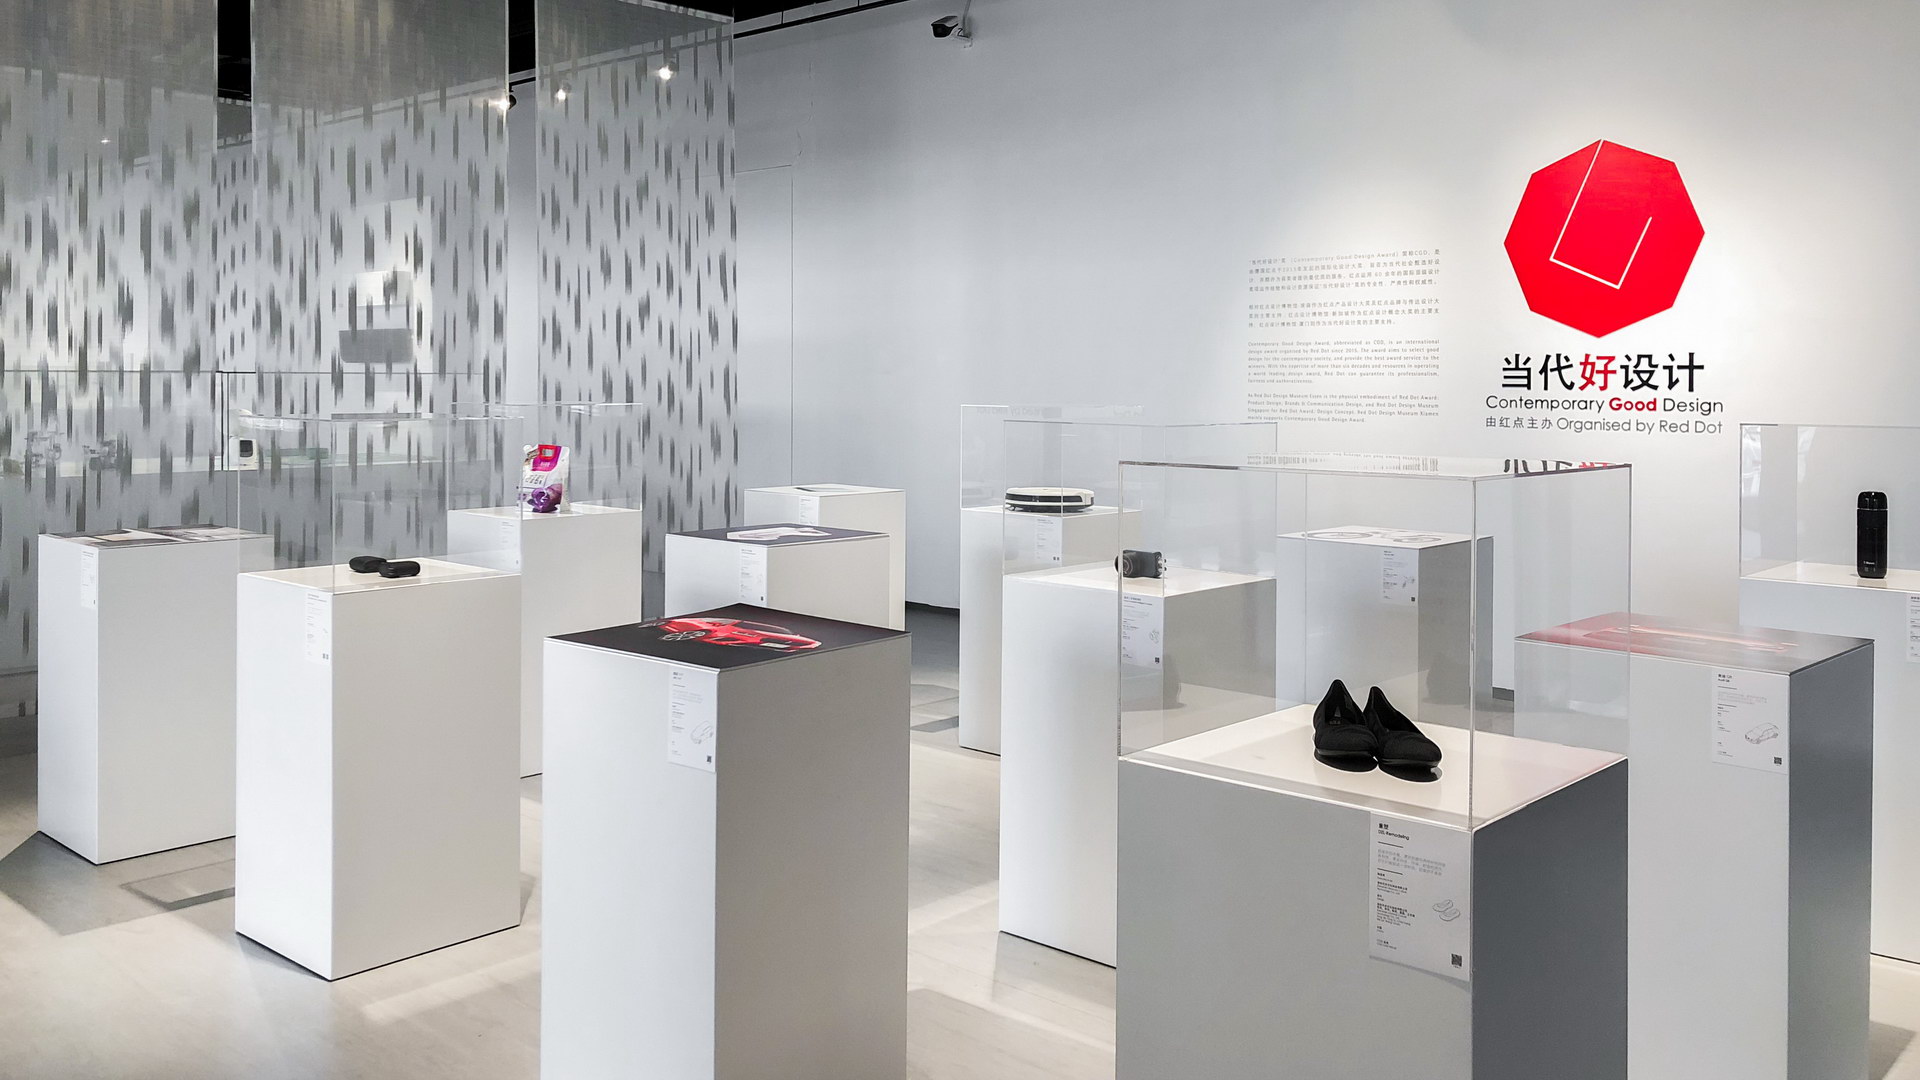 「Design Elements」exhibition is fully renewed